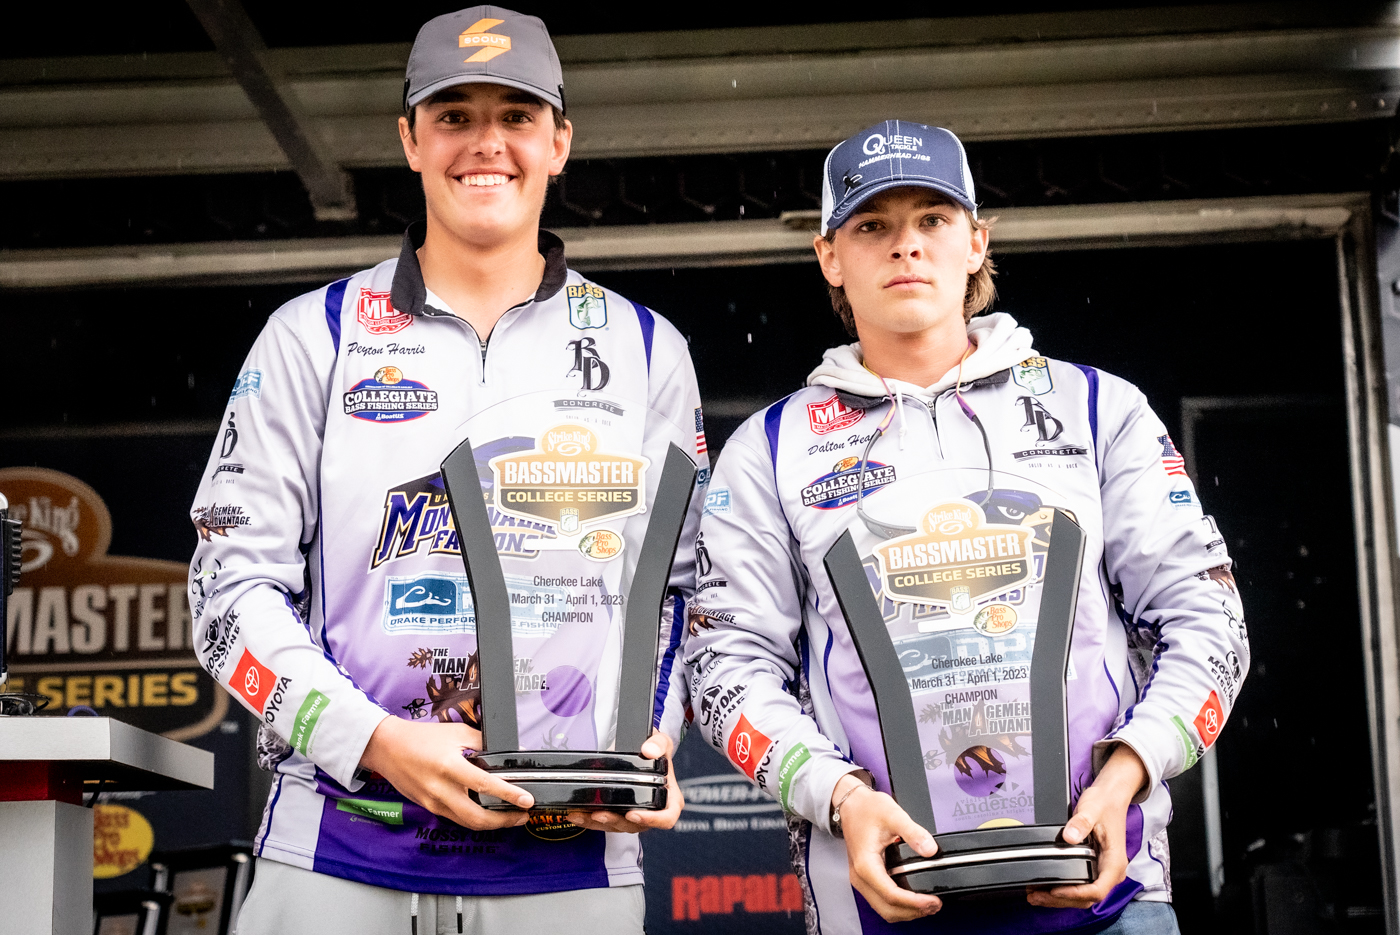 Montevallo's Harris and Head claim narrow win in Bassmaster College Series  event on Cherokee Lake – Anglers Channel